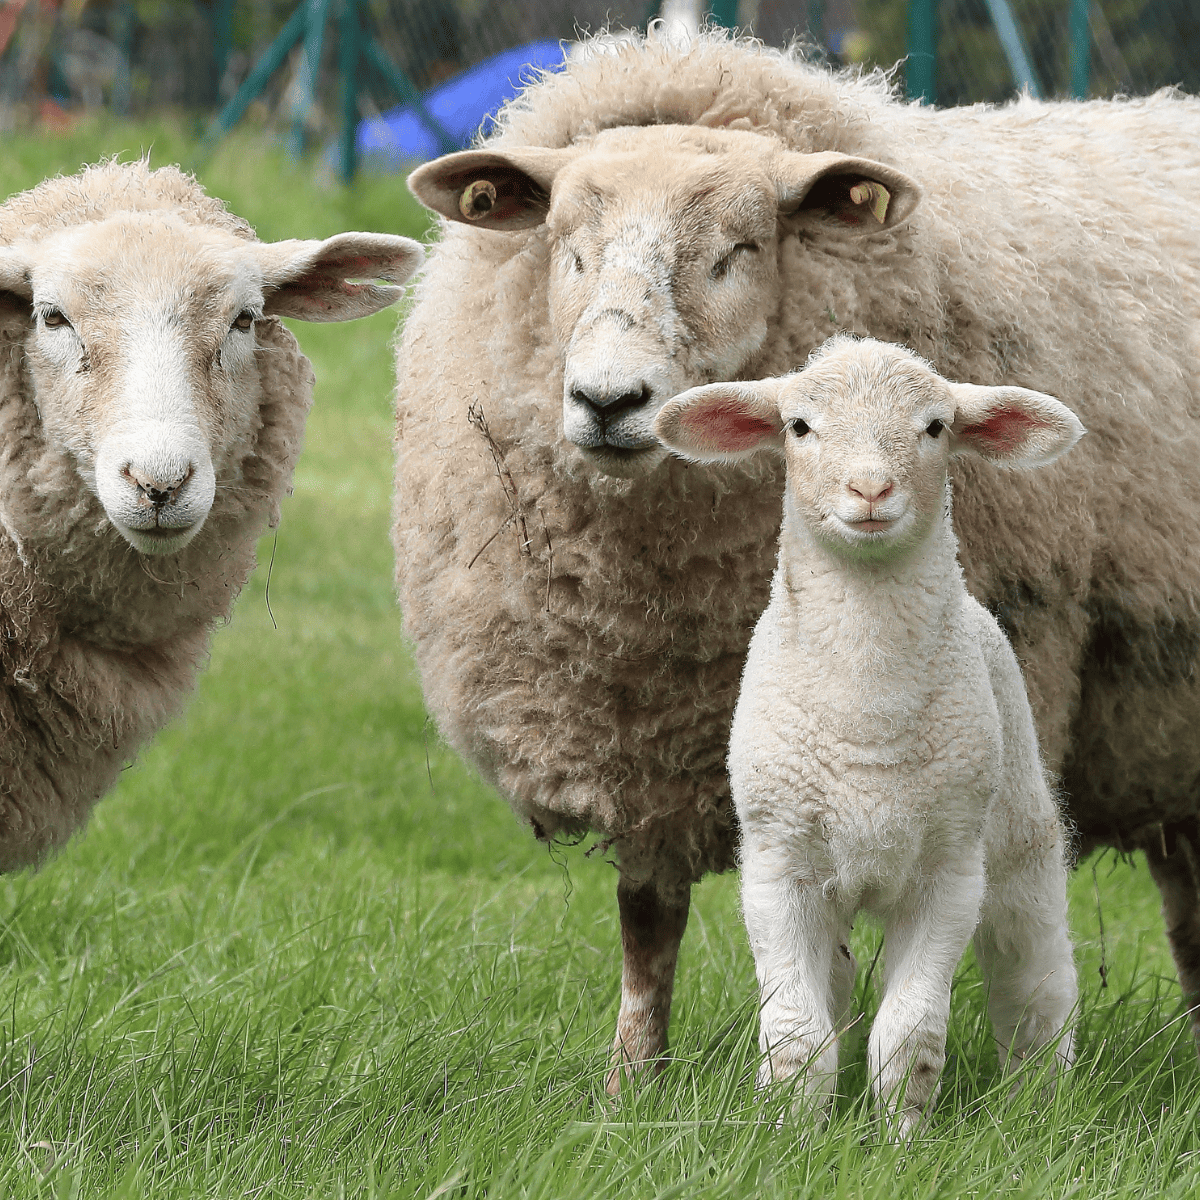 A stock image of two larger sheep with a baby lamb.